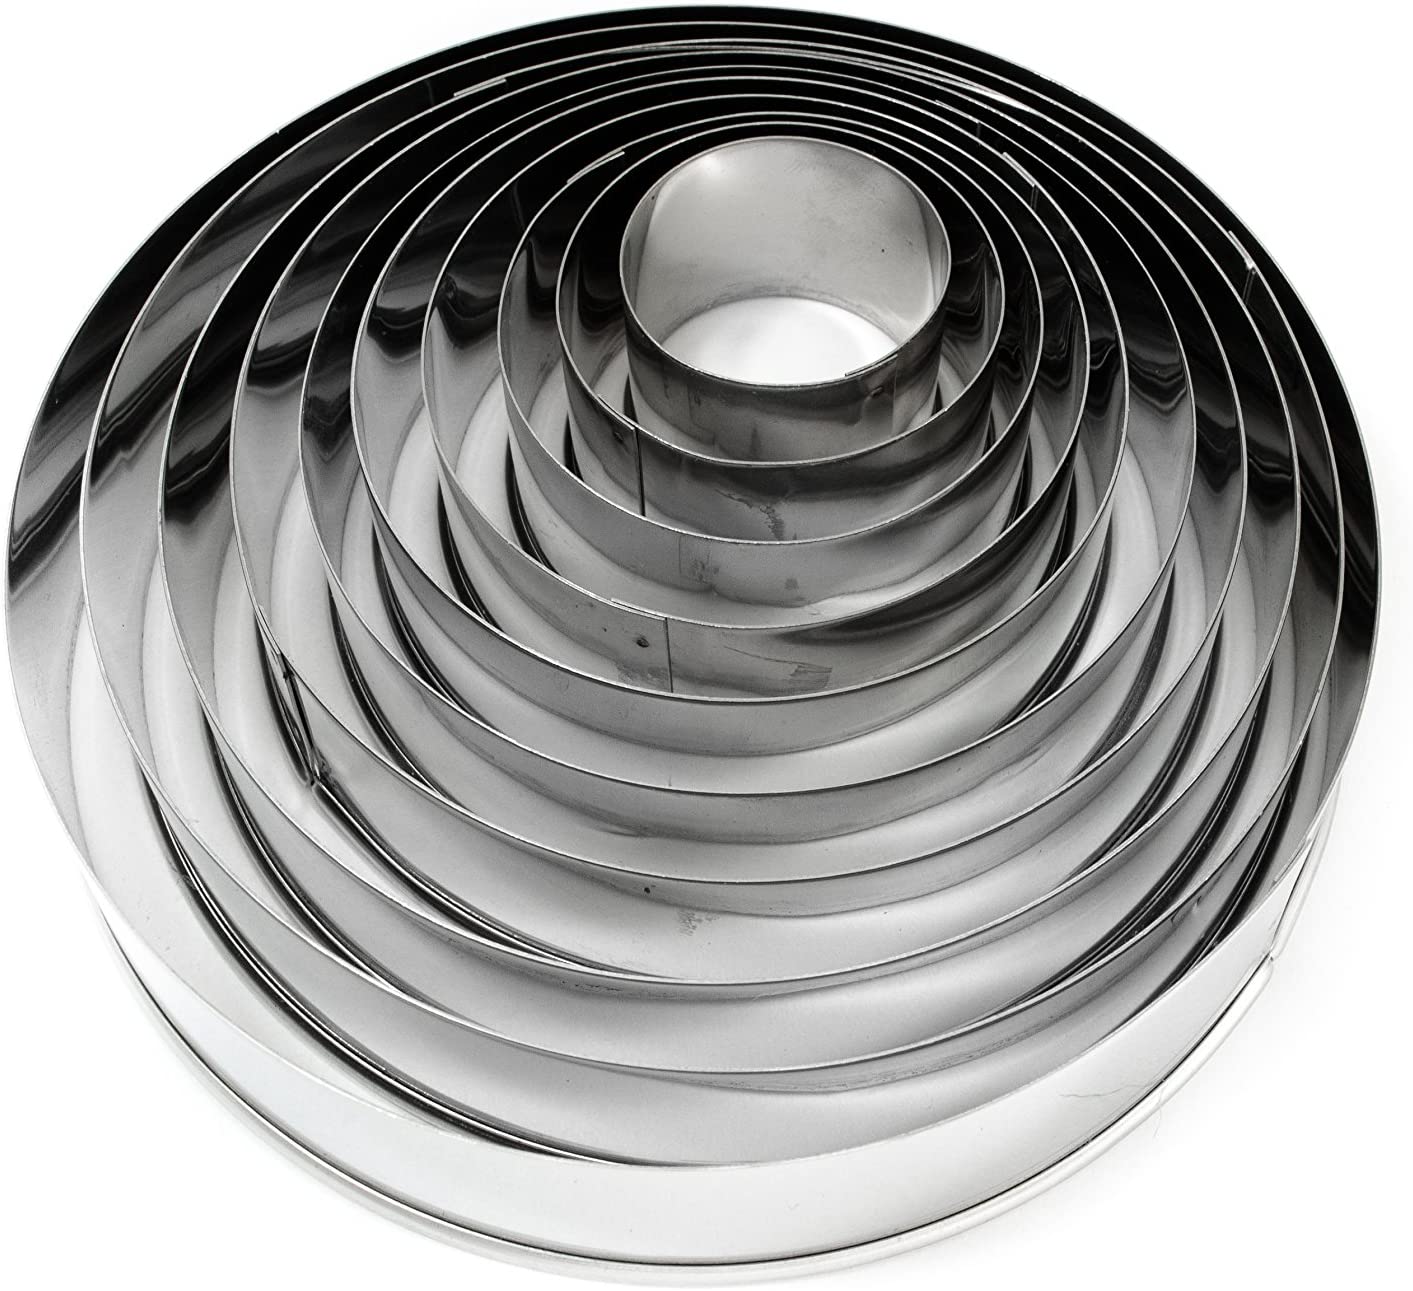 Städter 008052 Rings Set of 10 Tin Stainless Steel